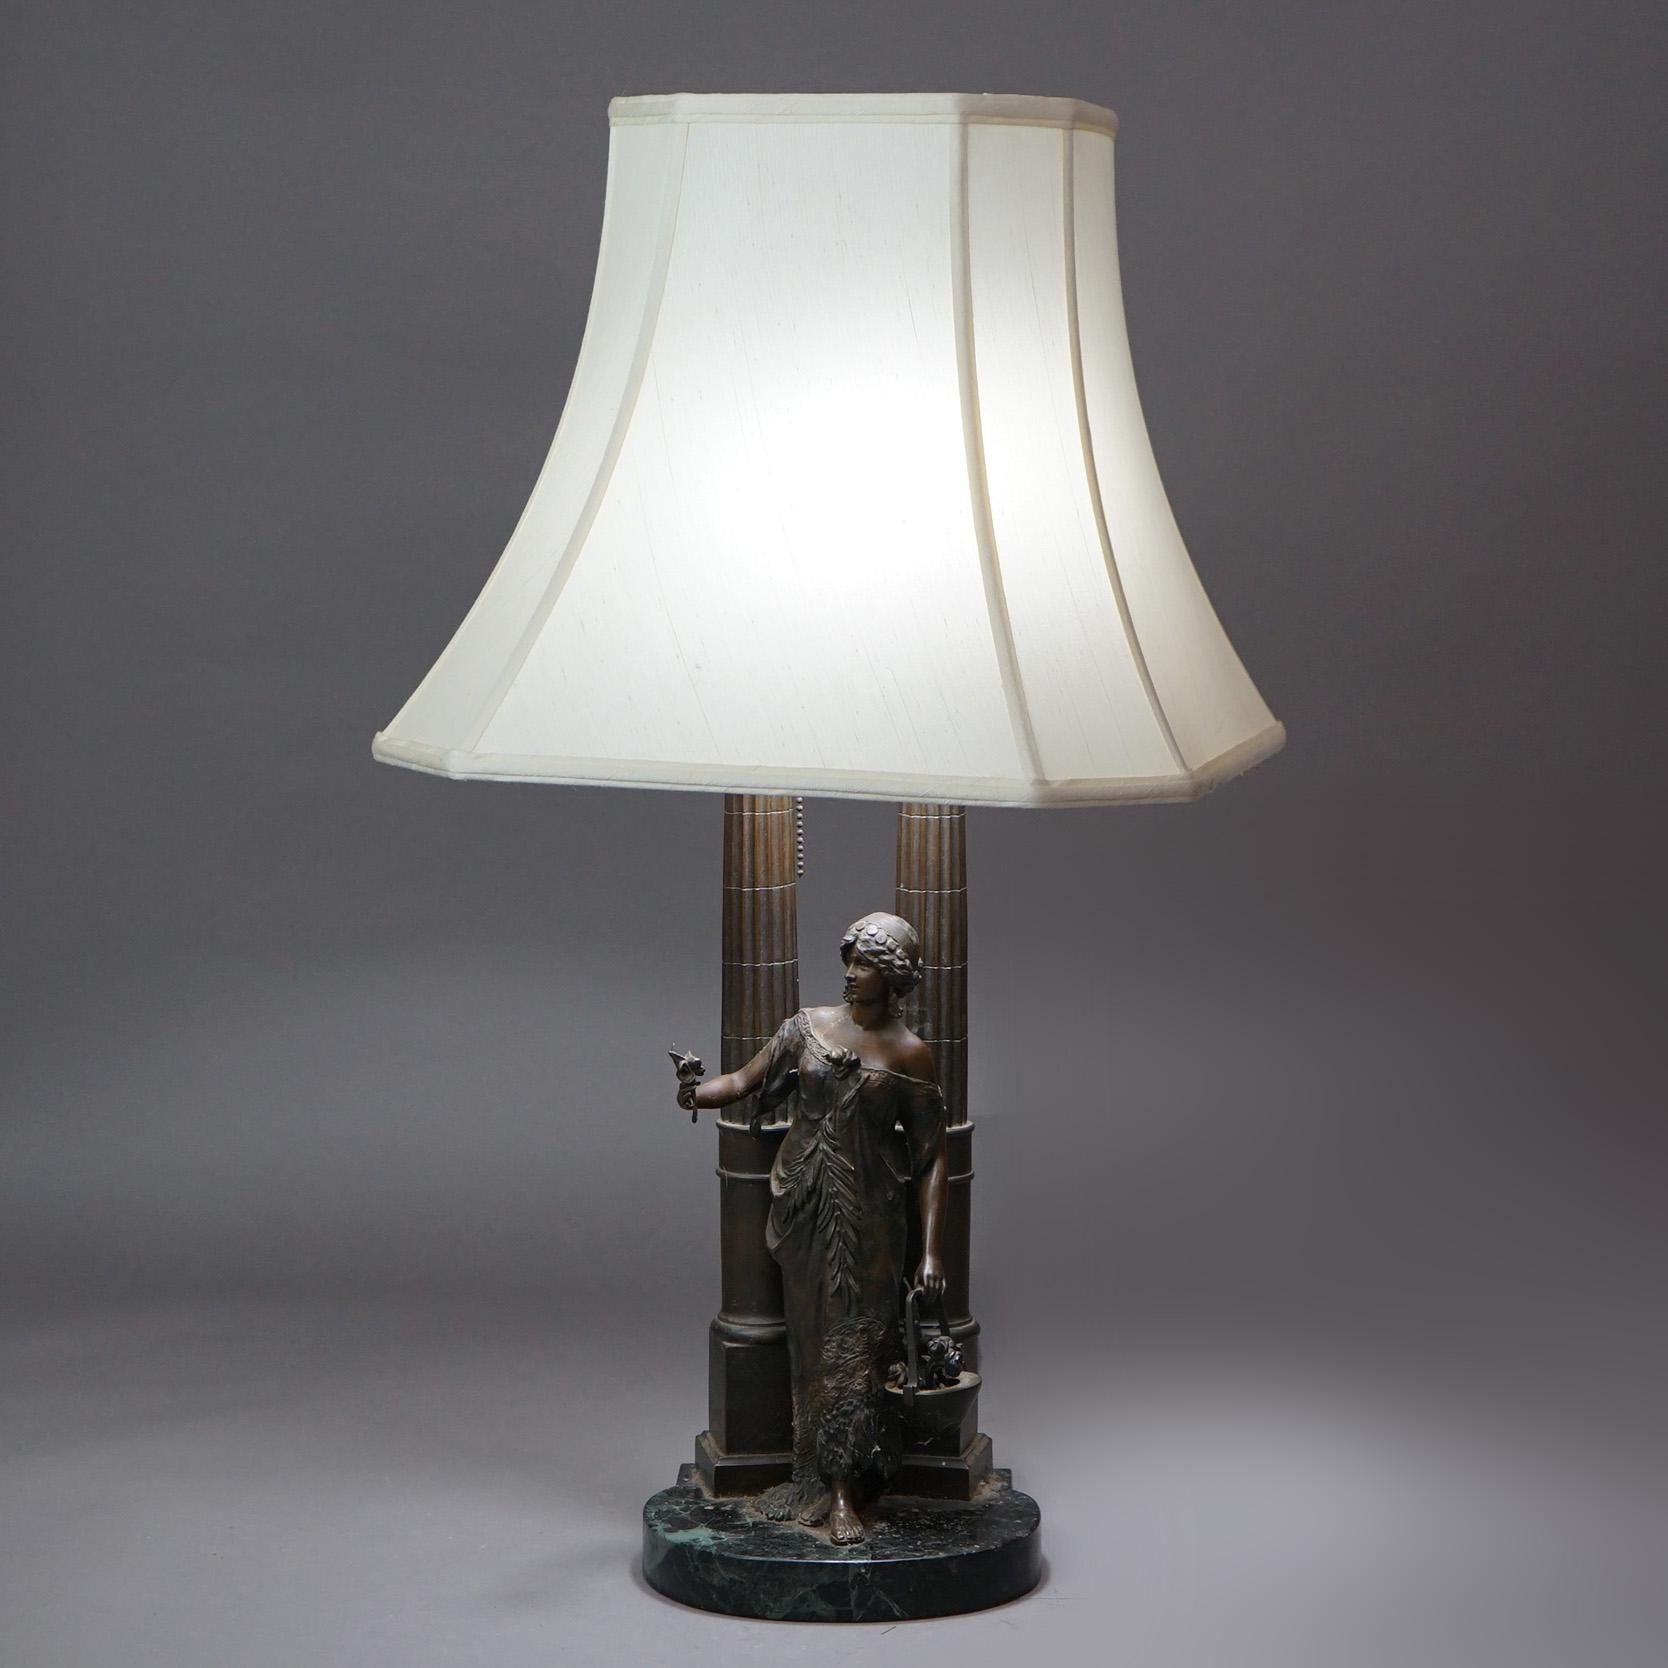 An antique figural table lamp offers bronzed cast metal construction with Classical woman standing among Corinthian columns, seated on marble plinth, c1910

Measures - 29